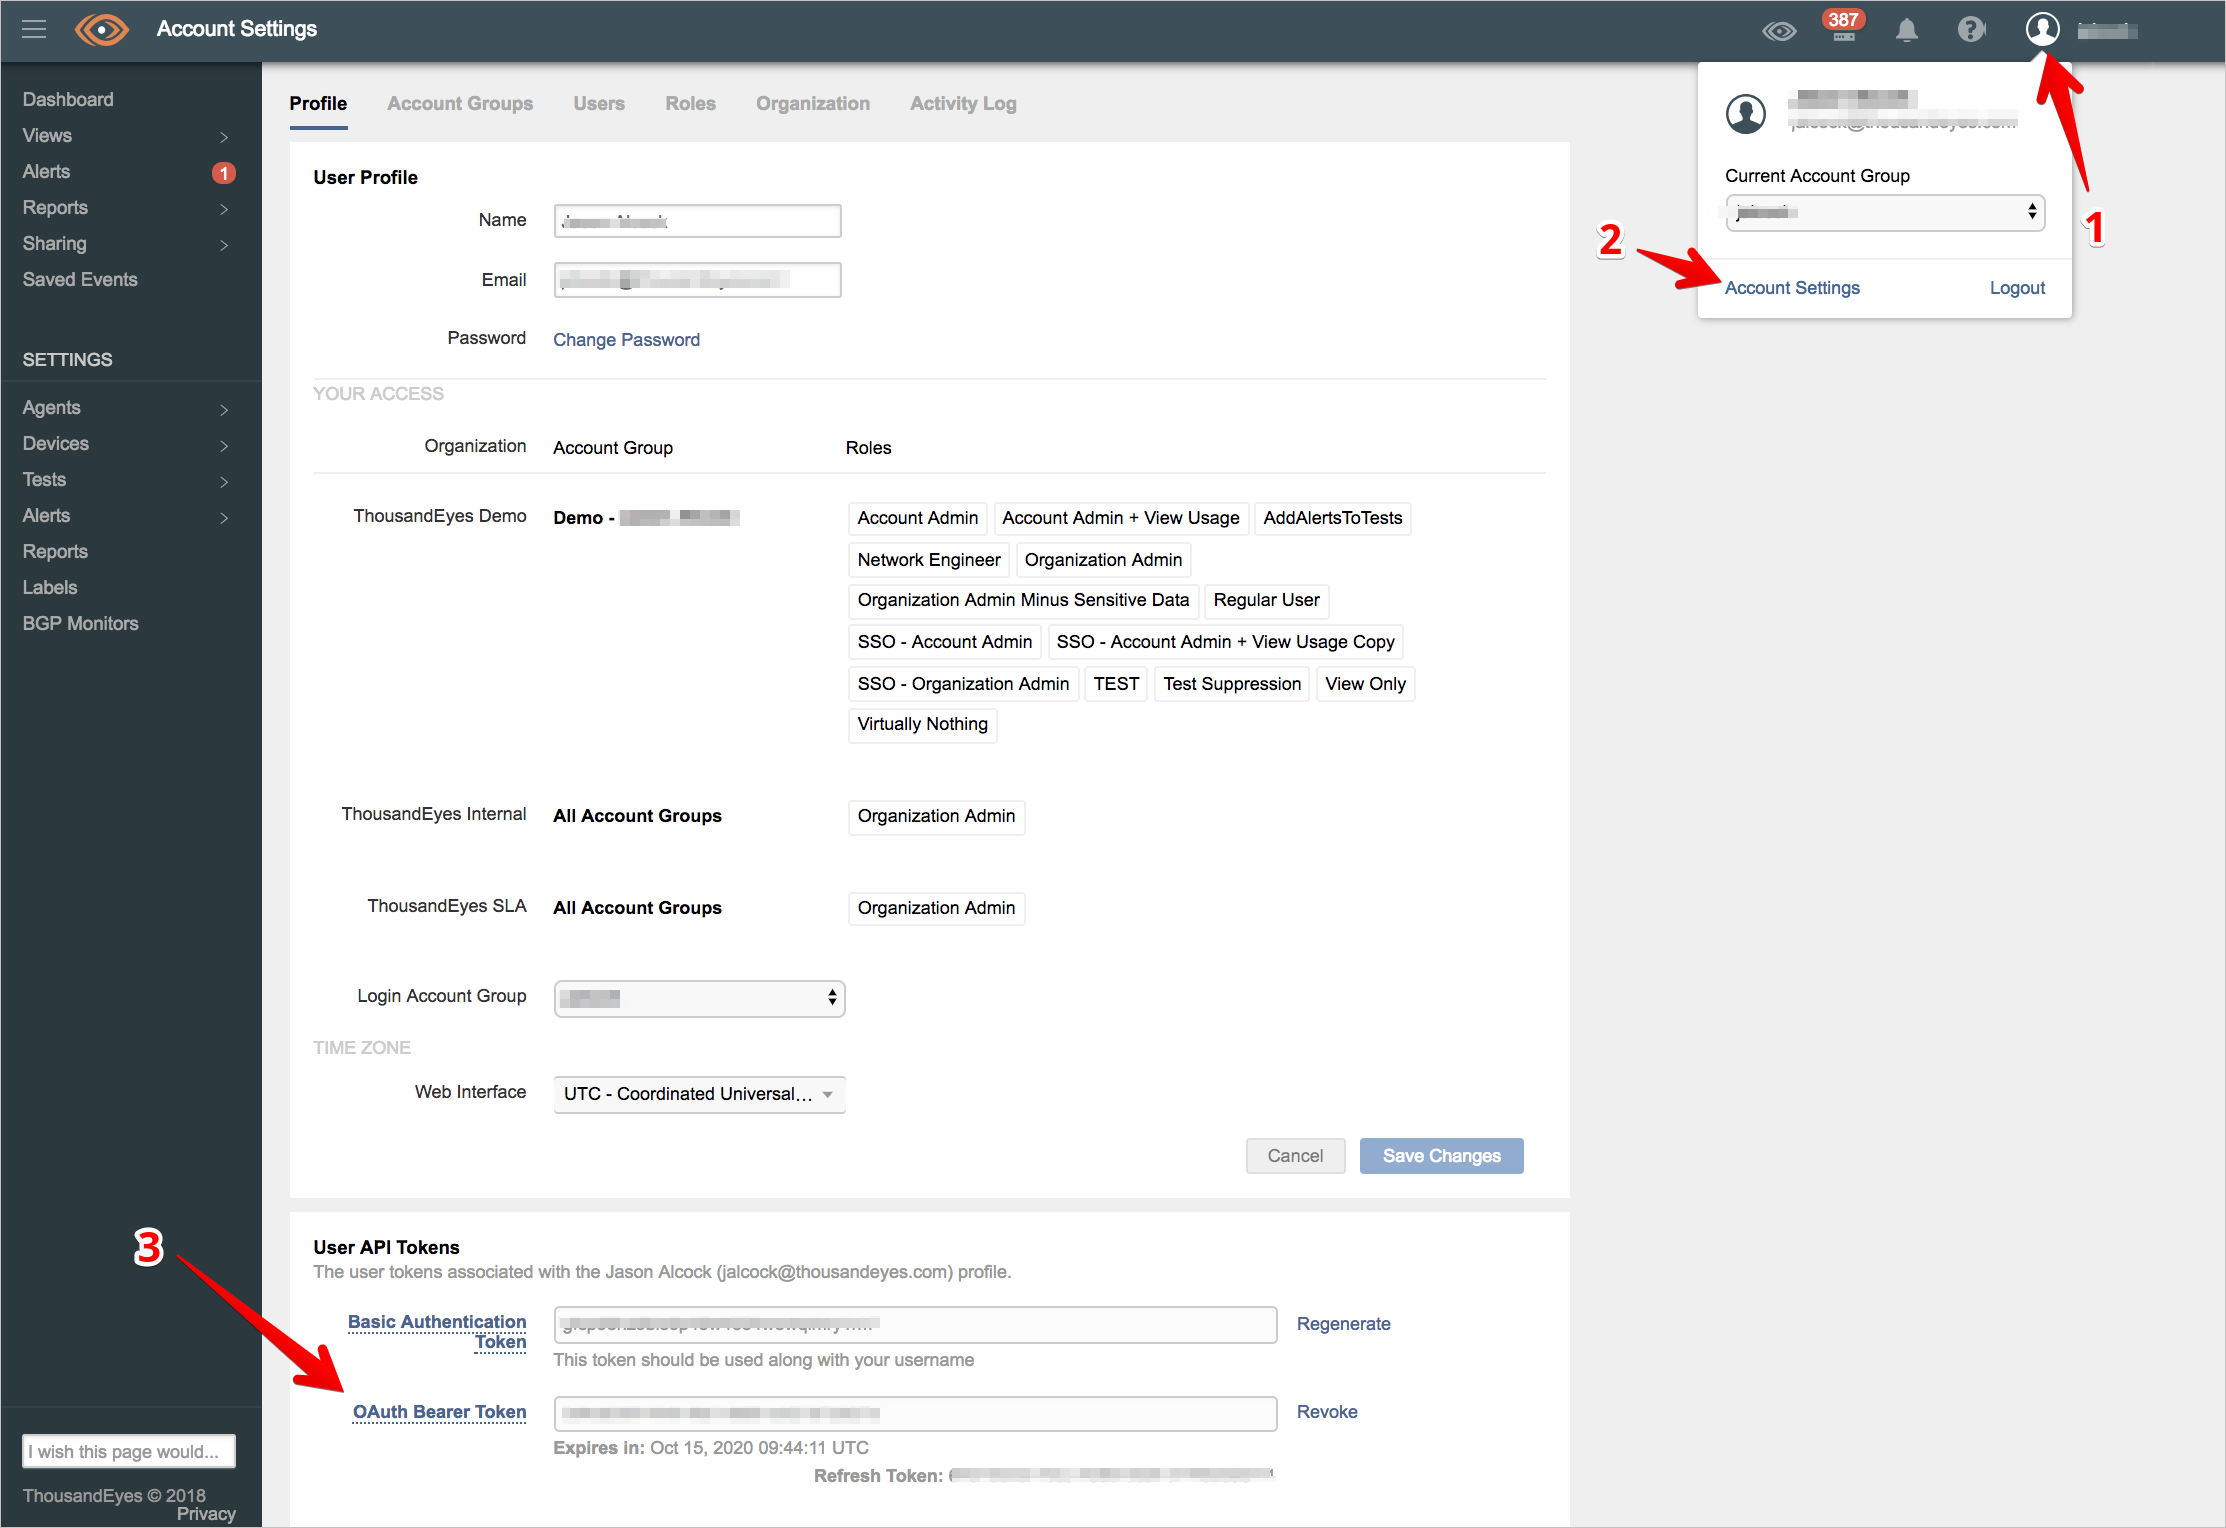 Screenshot shows where to find the Account Settings link for the Current Account Group.